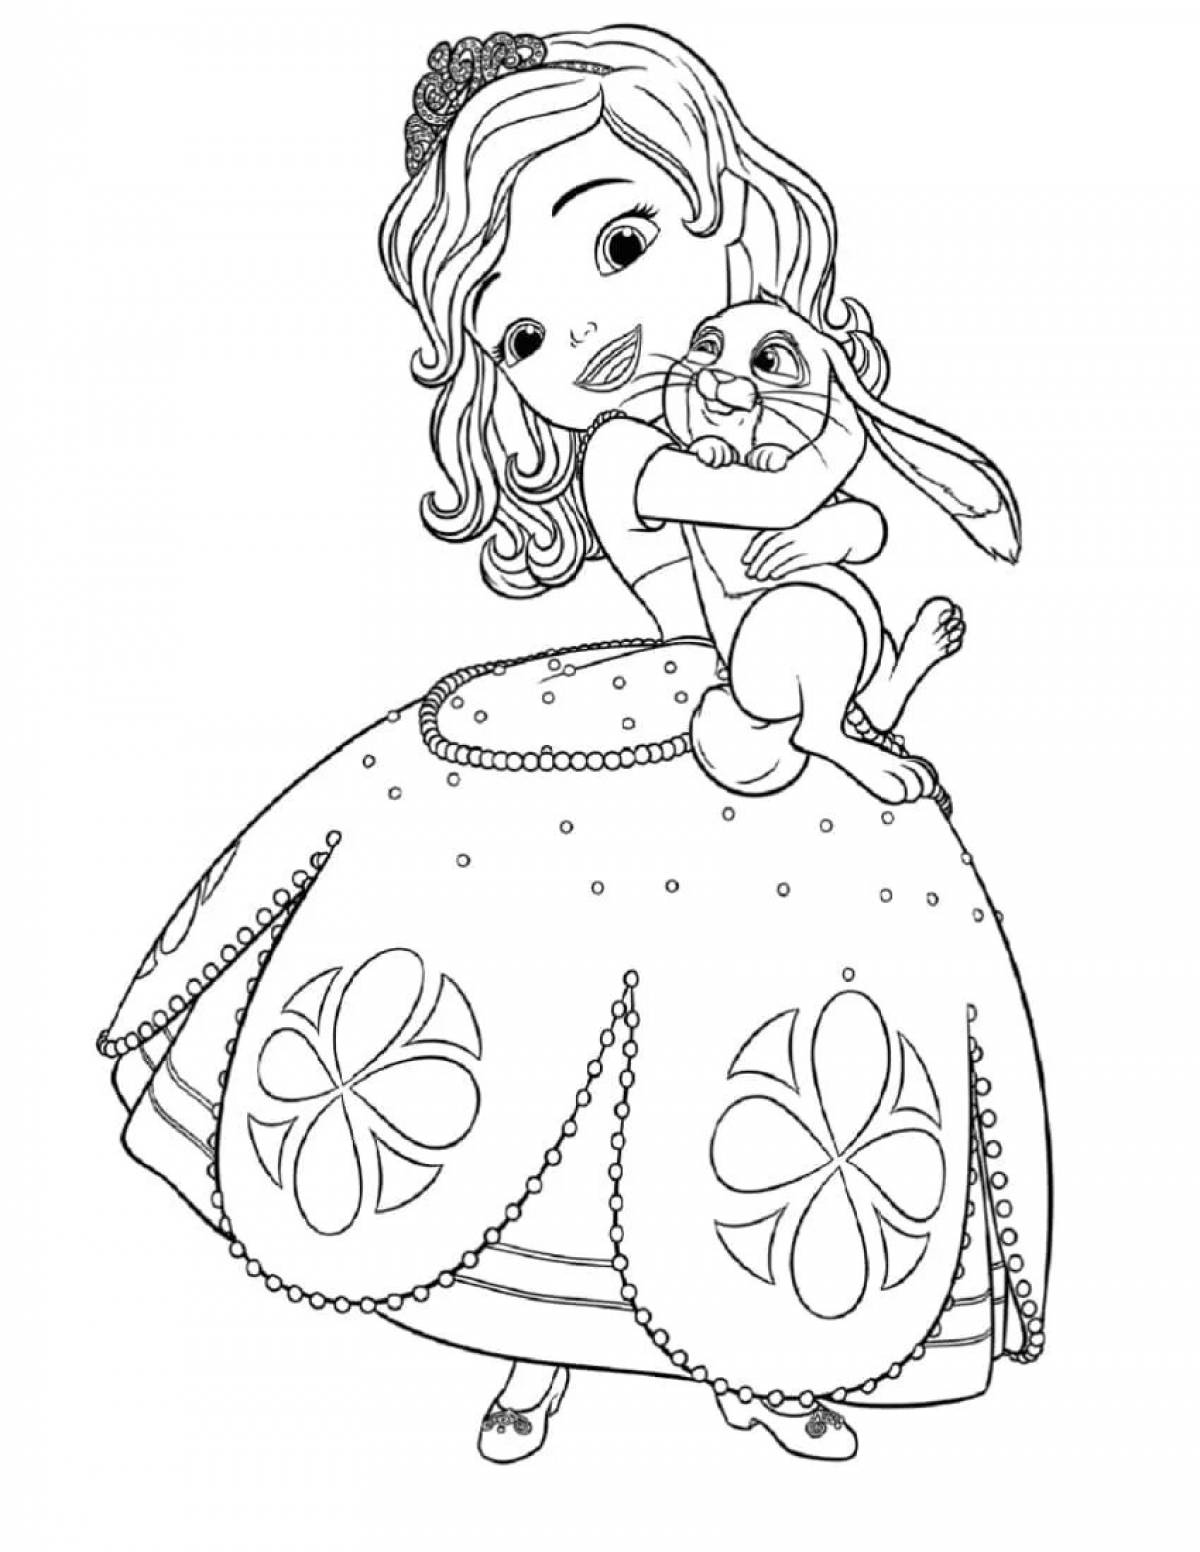 Fairytale princess coloring book for kids